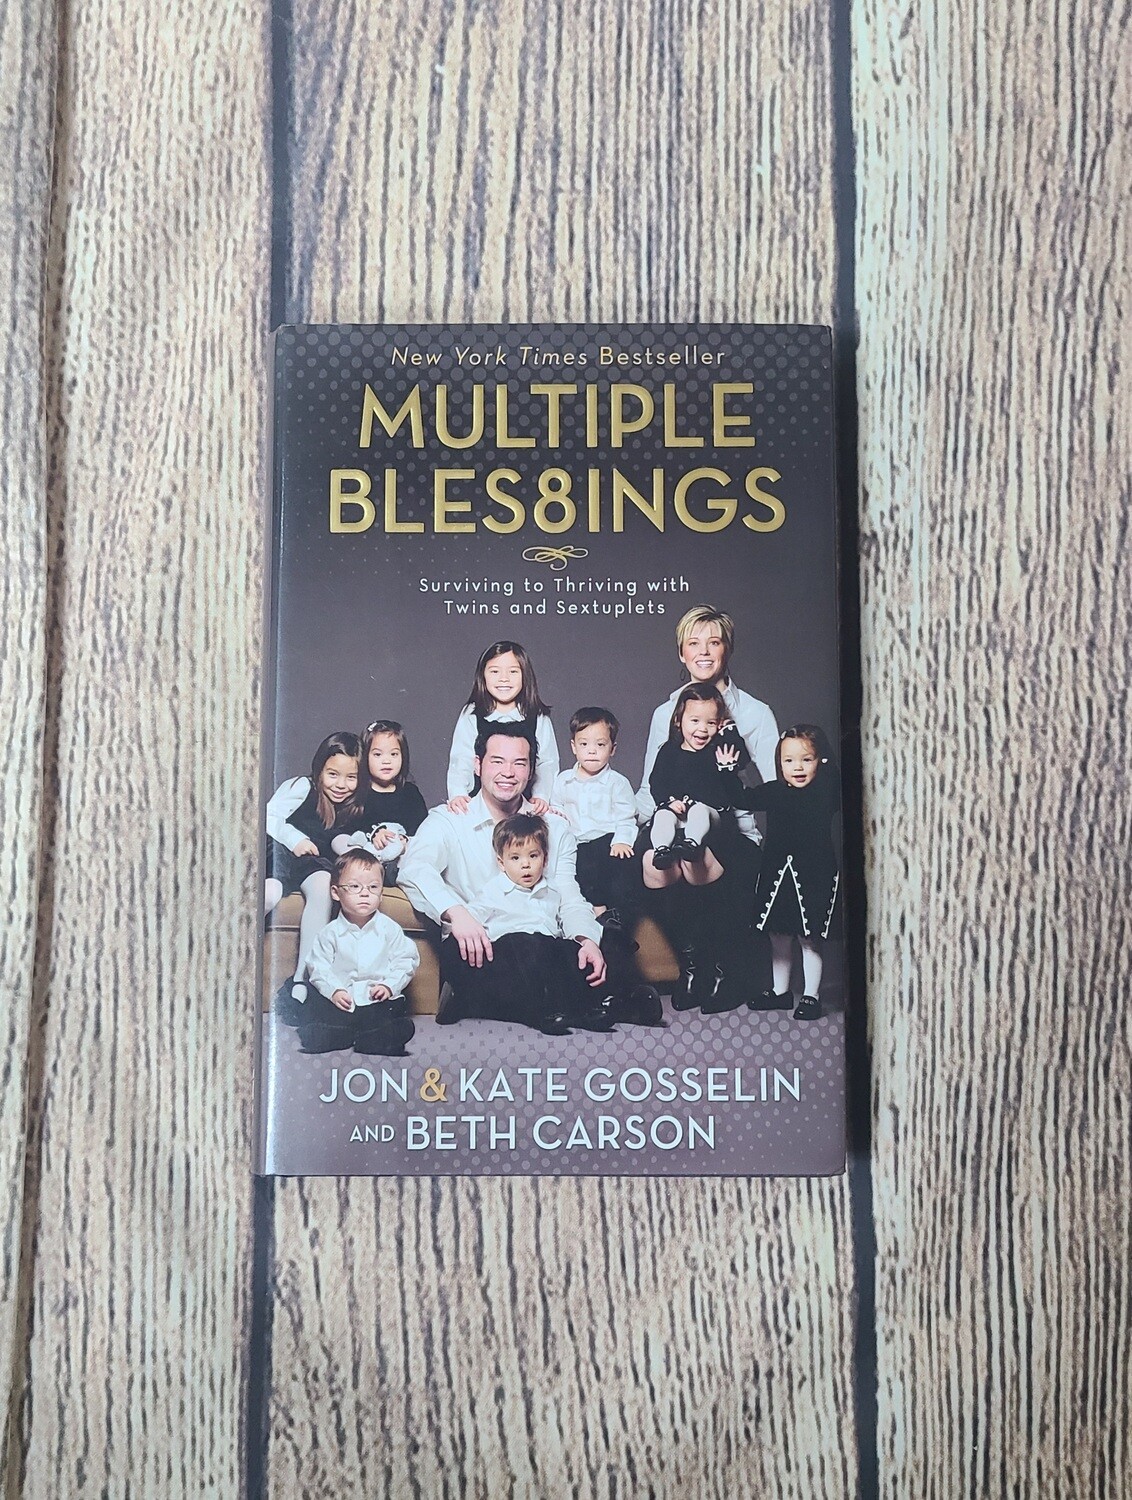 Multiple Bles8ings by Jon and Kate Gosselin and Beth Carson